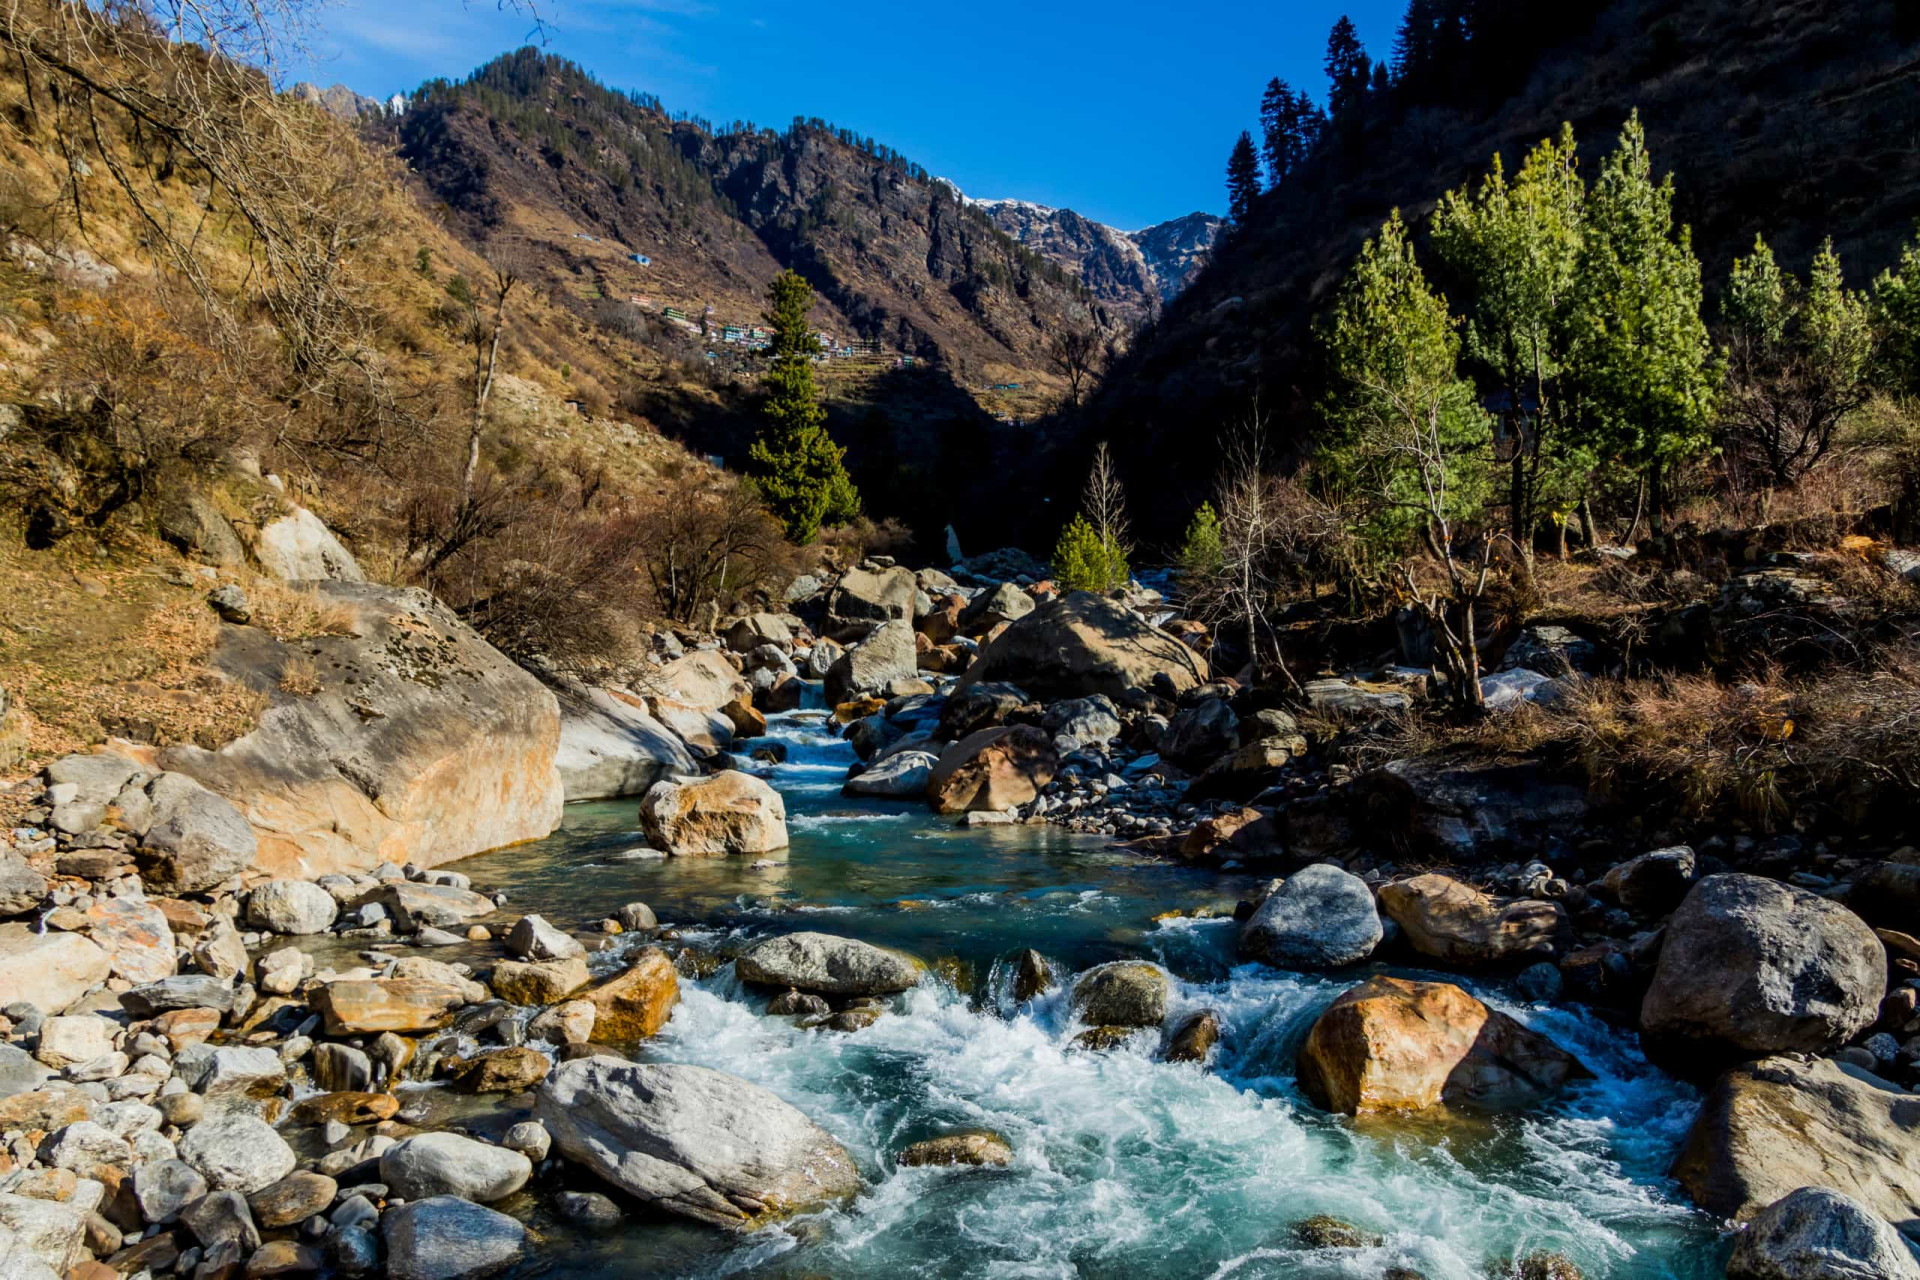 <p>Tucked away in the verdant Parvati Valley in the Kullu district of Himachal Pradesh is Kasol hill station. A Himalaya hotspot for backpackers, Kasol is found at an elevation of 1,640 m (5,380 ft) on the way to the pilgrim town of Manikaran. Interestingly, Kasol has a sizeable Israeli population, and visitors can't help noticing the abundance of signs outside shops and cafés written in Hebrew.</p>